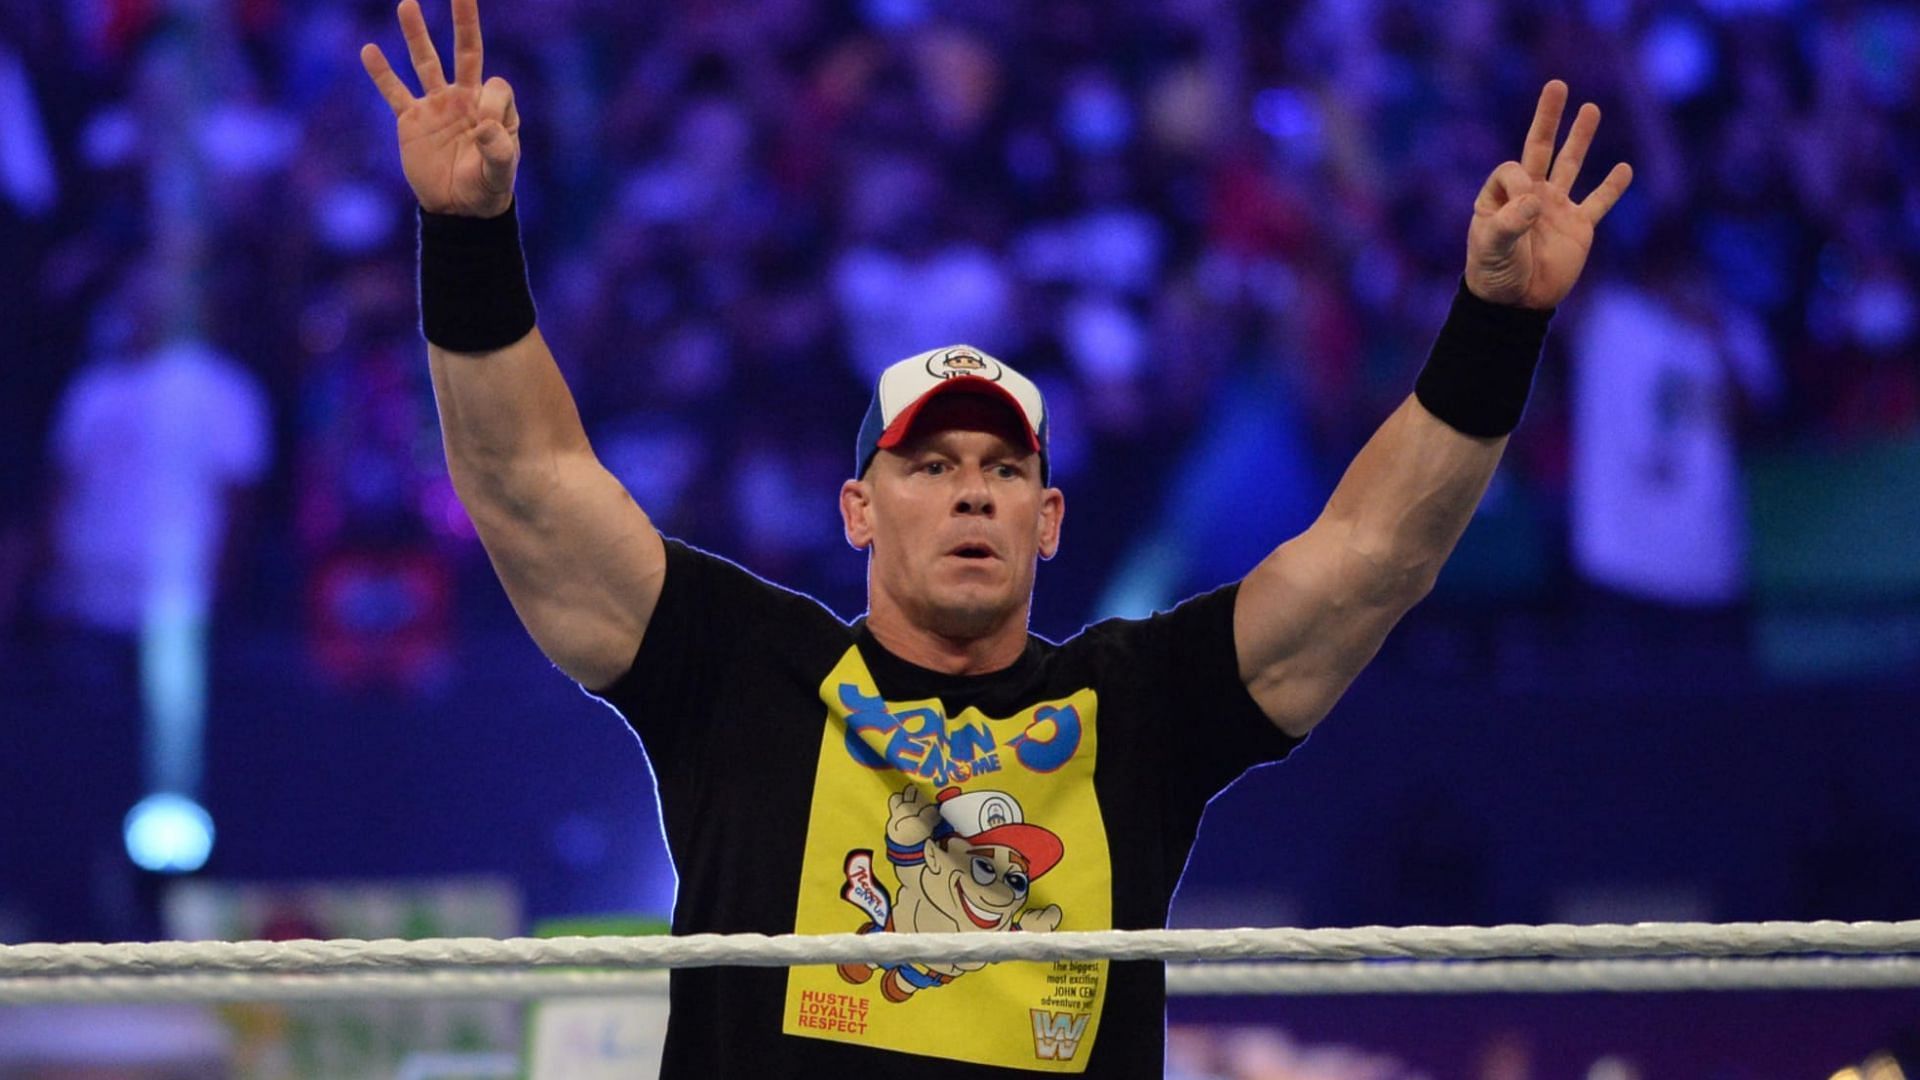 Latest On John Cena’s Involvement With WWE’s Plans For Wrestlemania 39 2